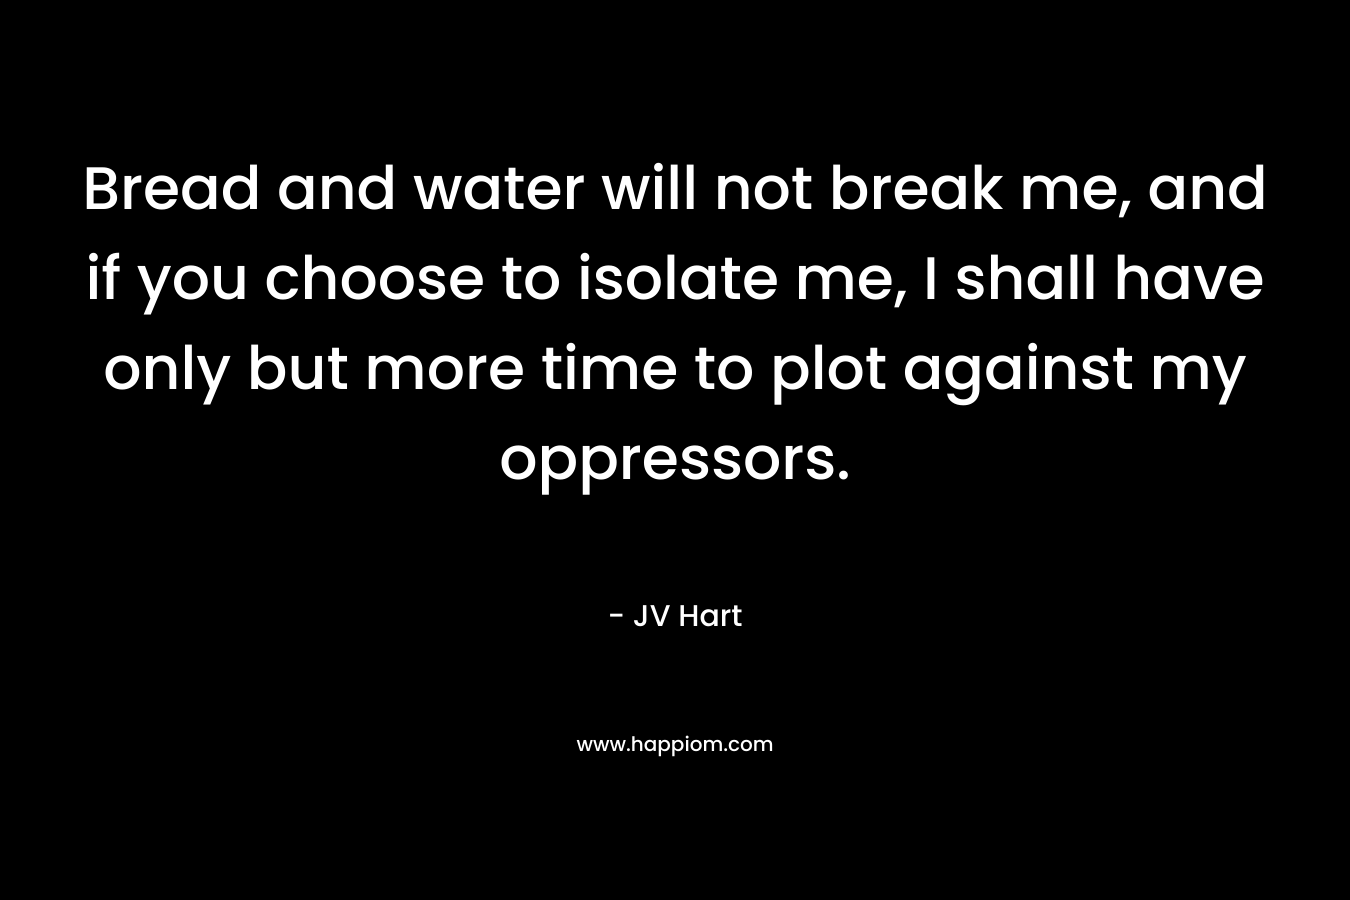 Bread and water will not break me, and if you choose to isolate me, I shall have only but more time to plot against my oppressors.